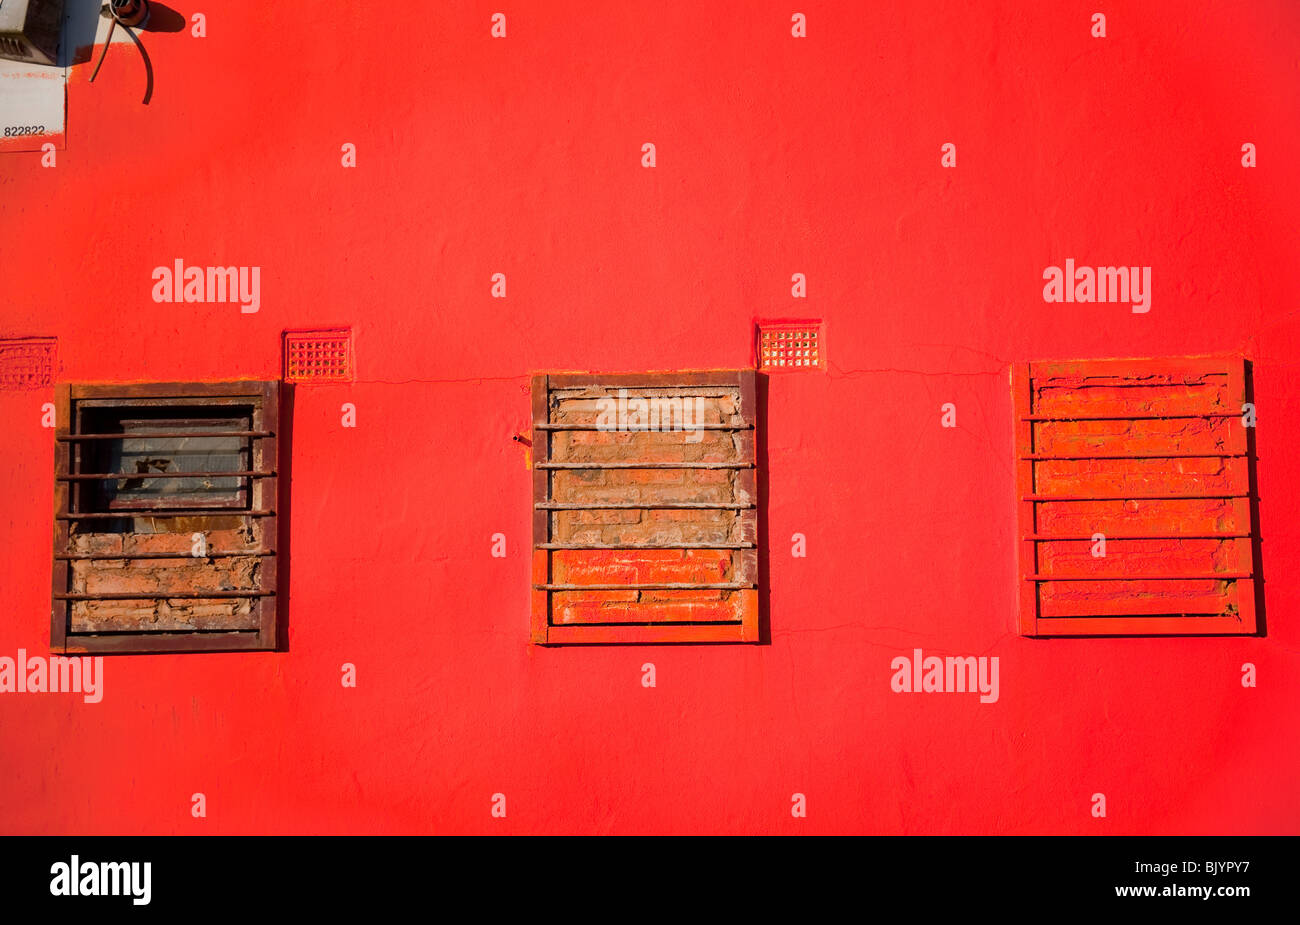 Red wall with 3 windows with steel bars Stock Photo